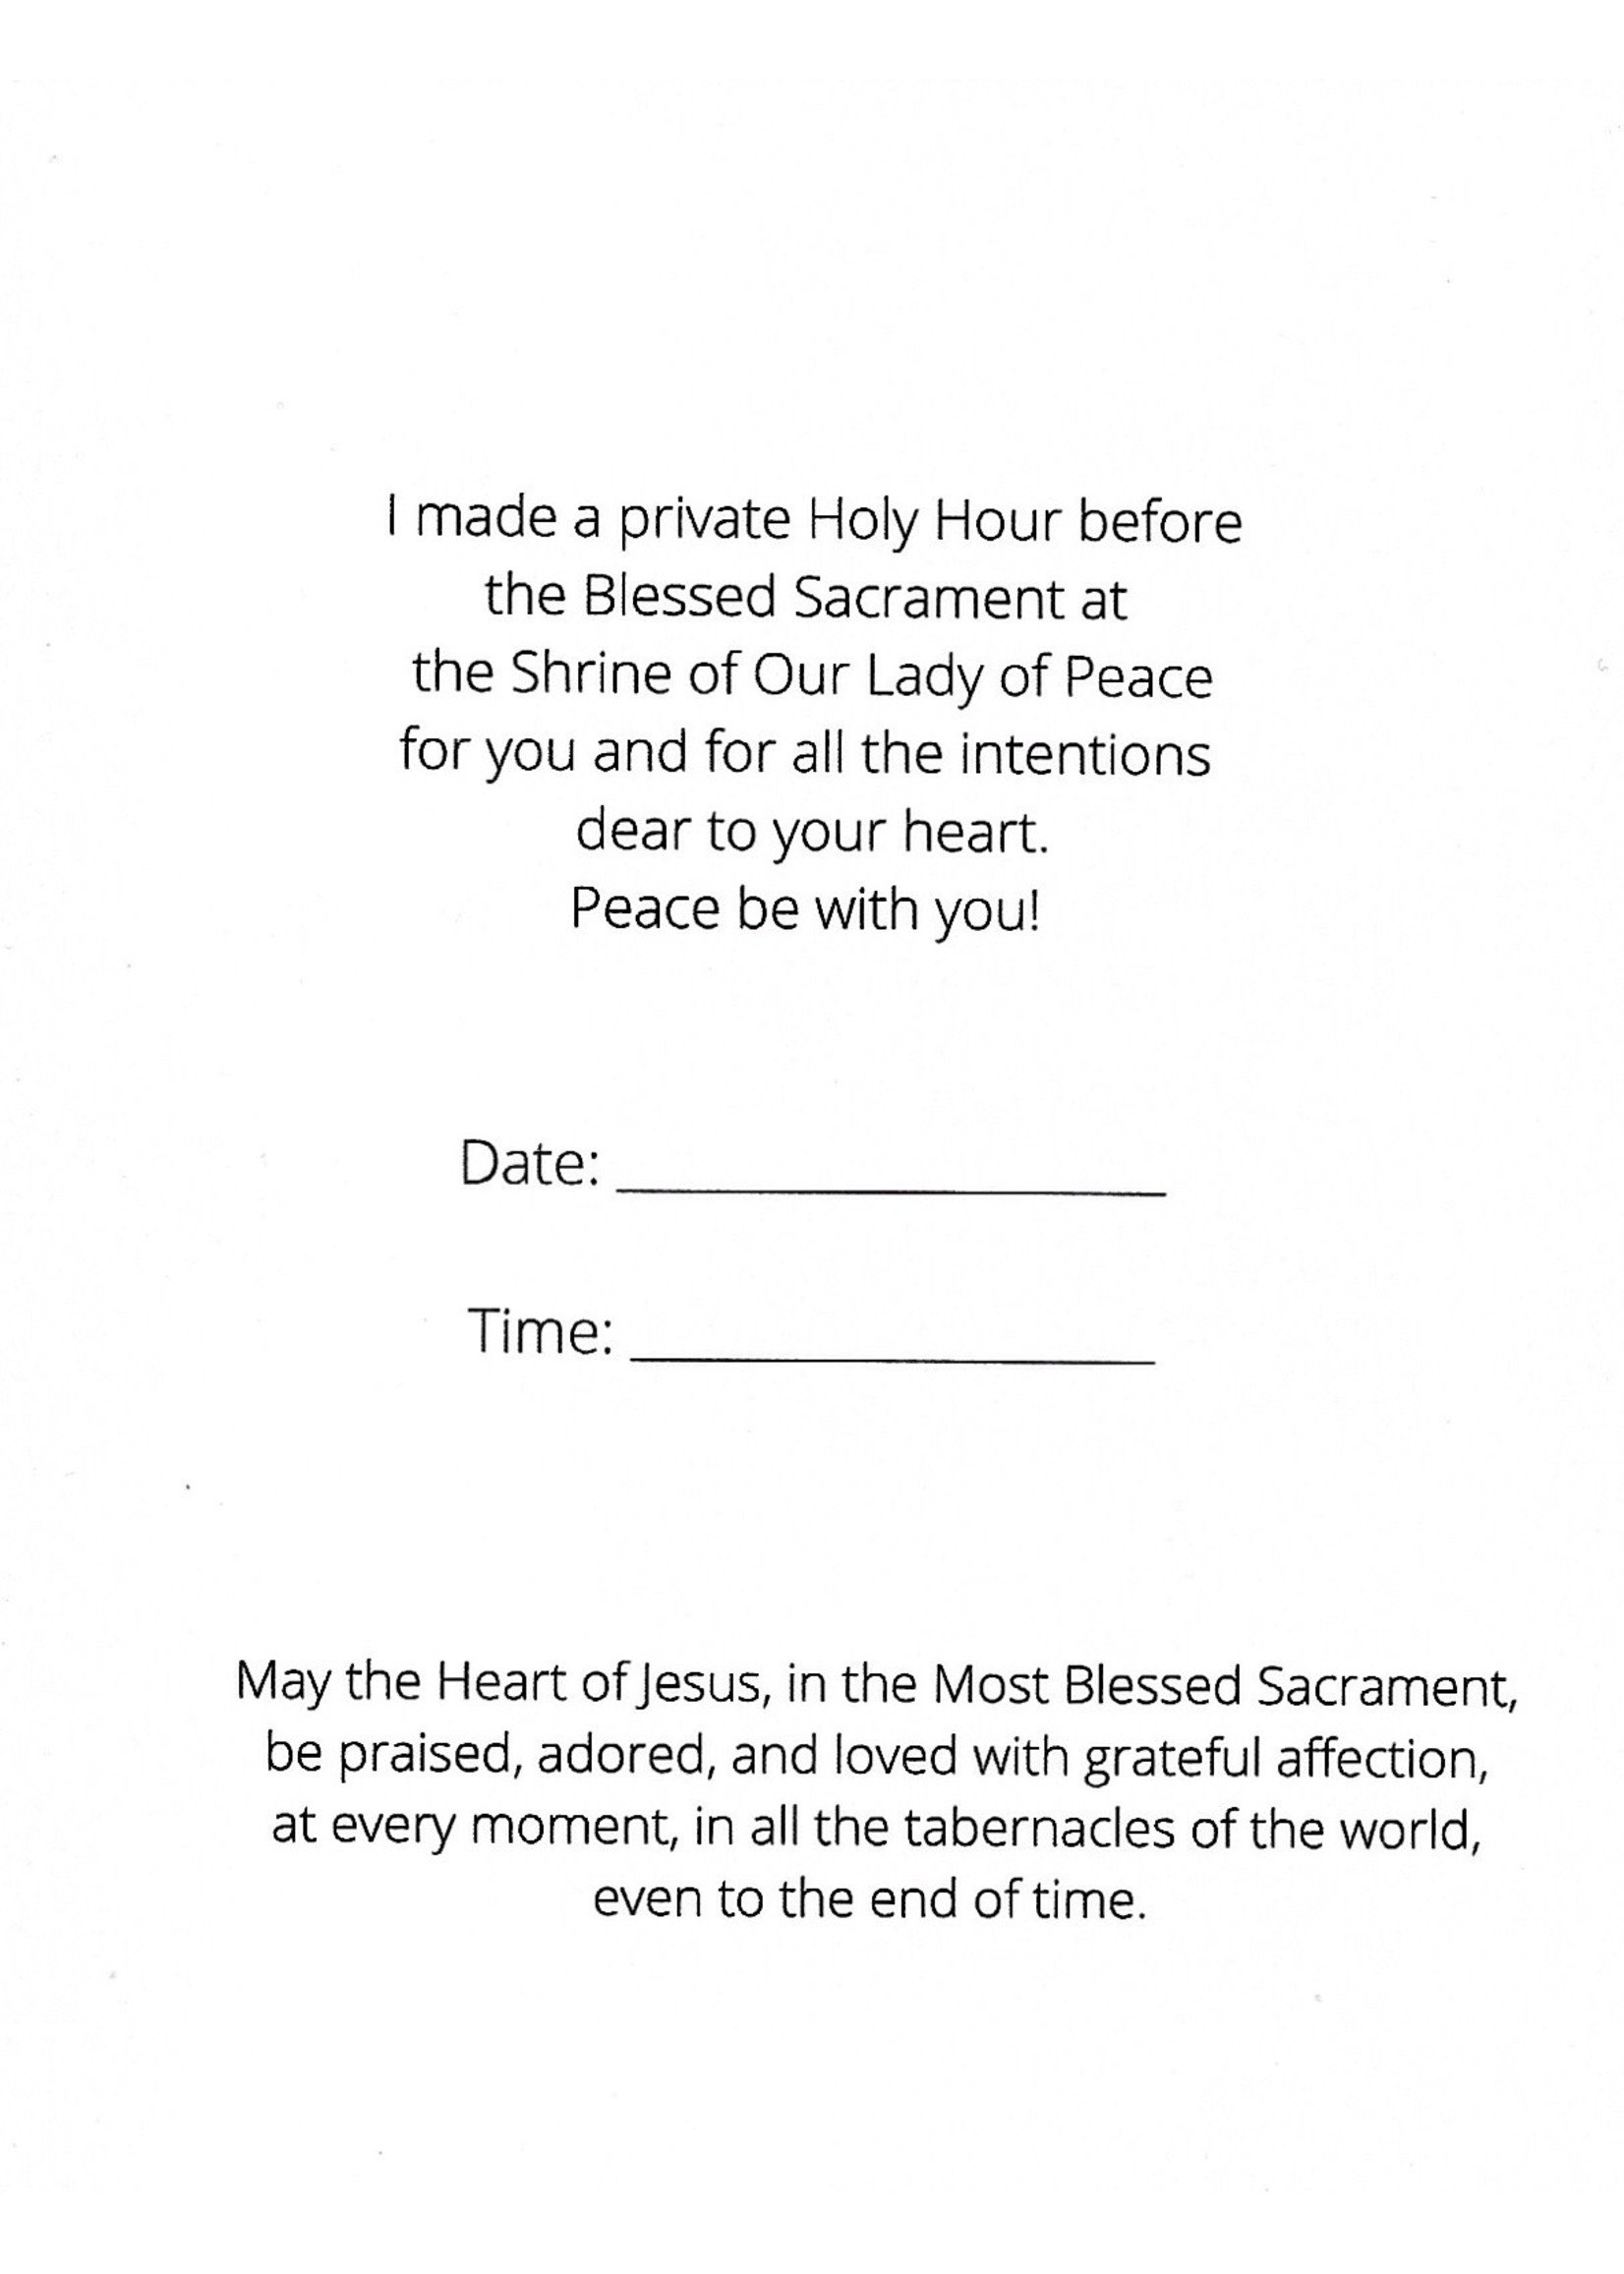 Our Lady of Peace Holy Hour Blessing Card